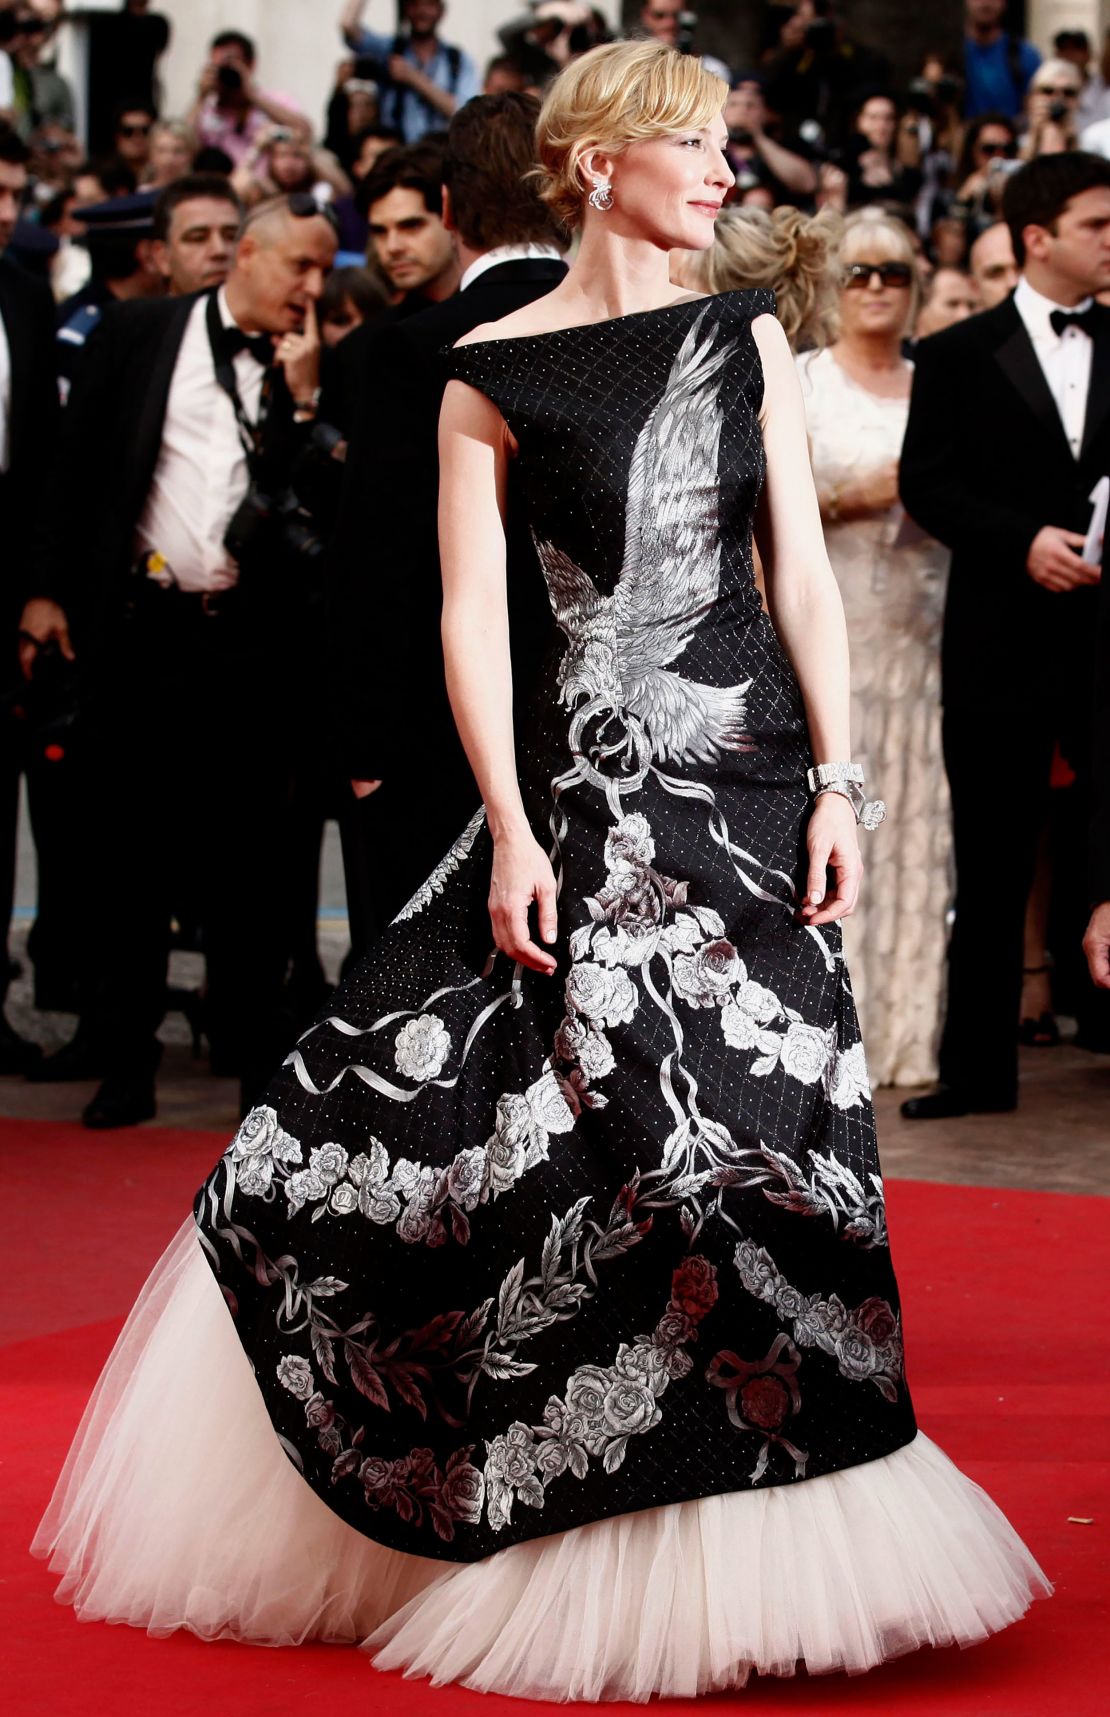 Cate Blanchett honoured designer Alexander McQueen by wearing this monochrome dress from his pre-fall 2010 collection. 